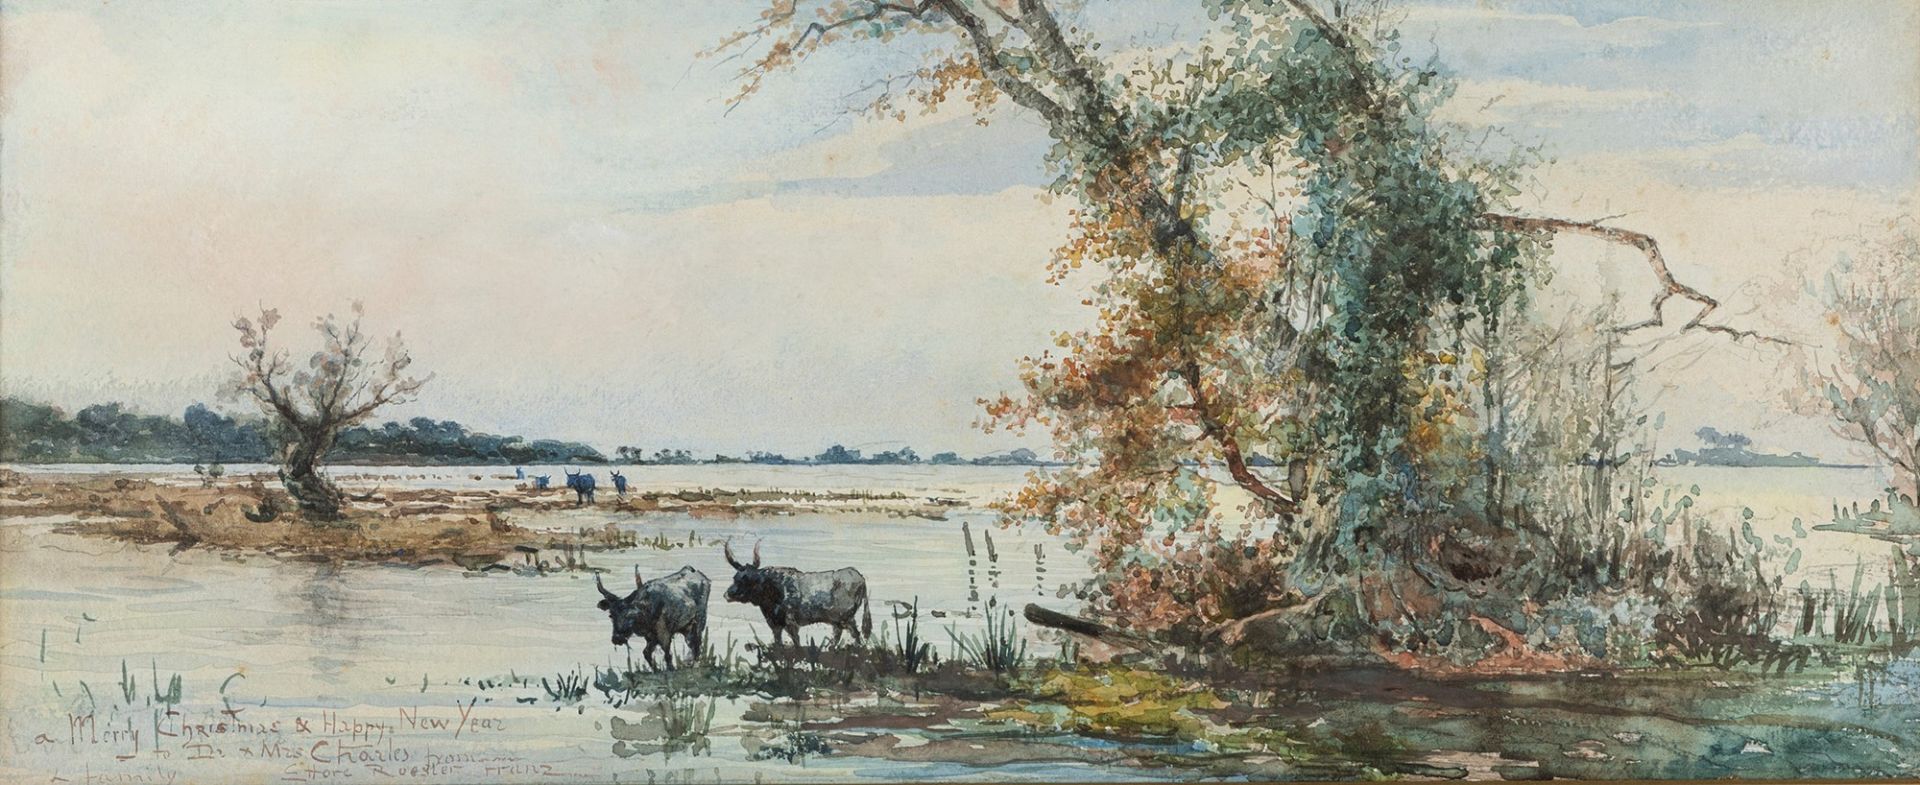 Ettore Roesler Franz (Roma 1845-1907) - Buffaloes in the swamp